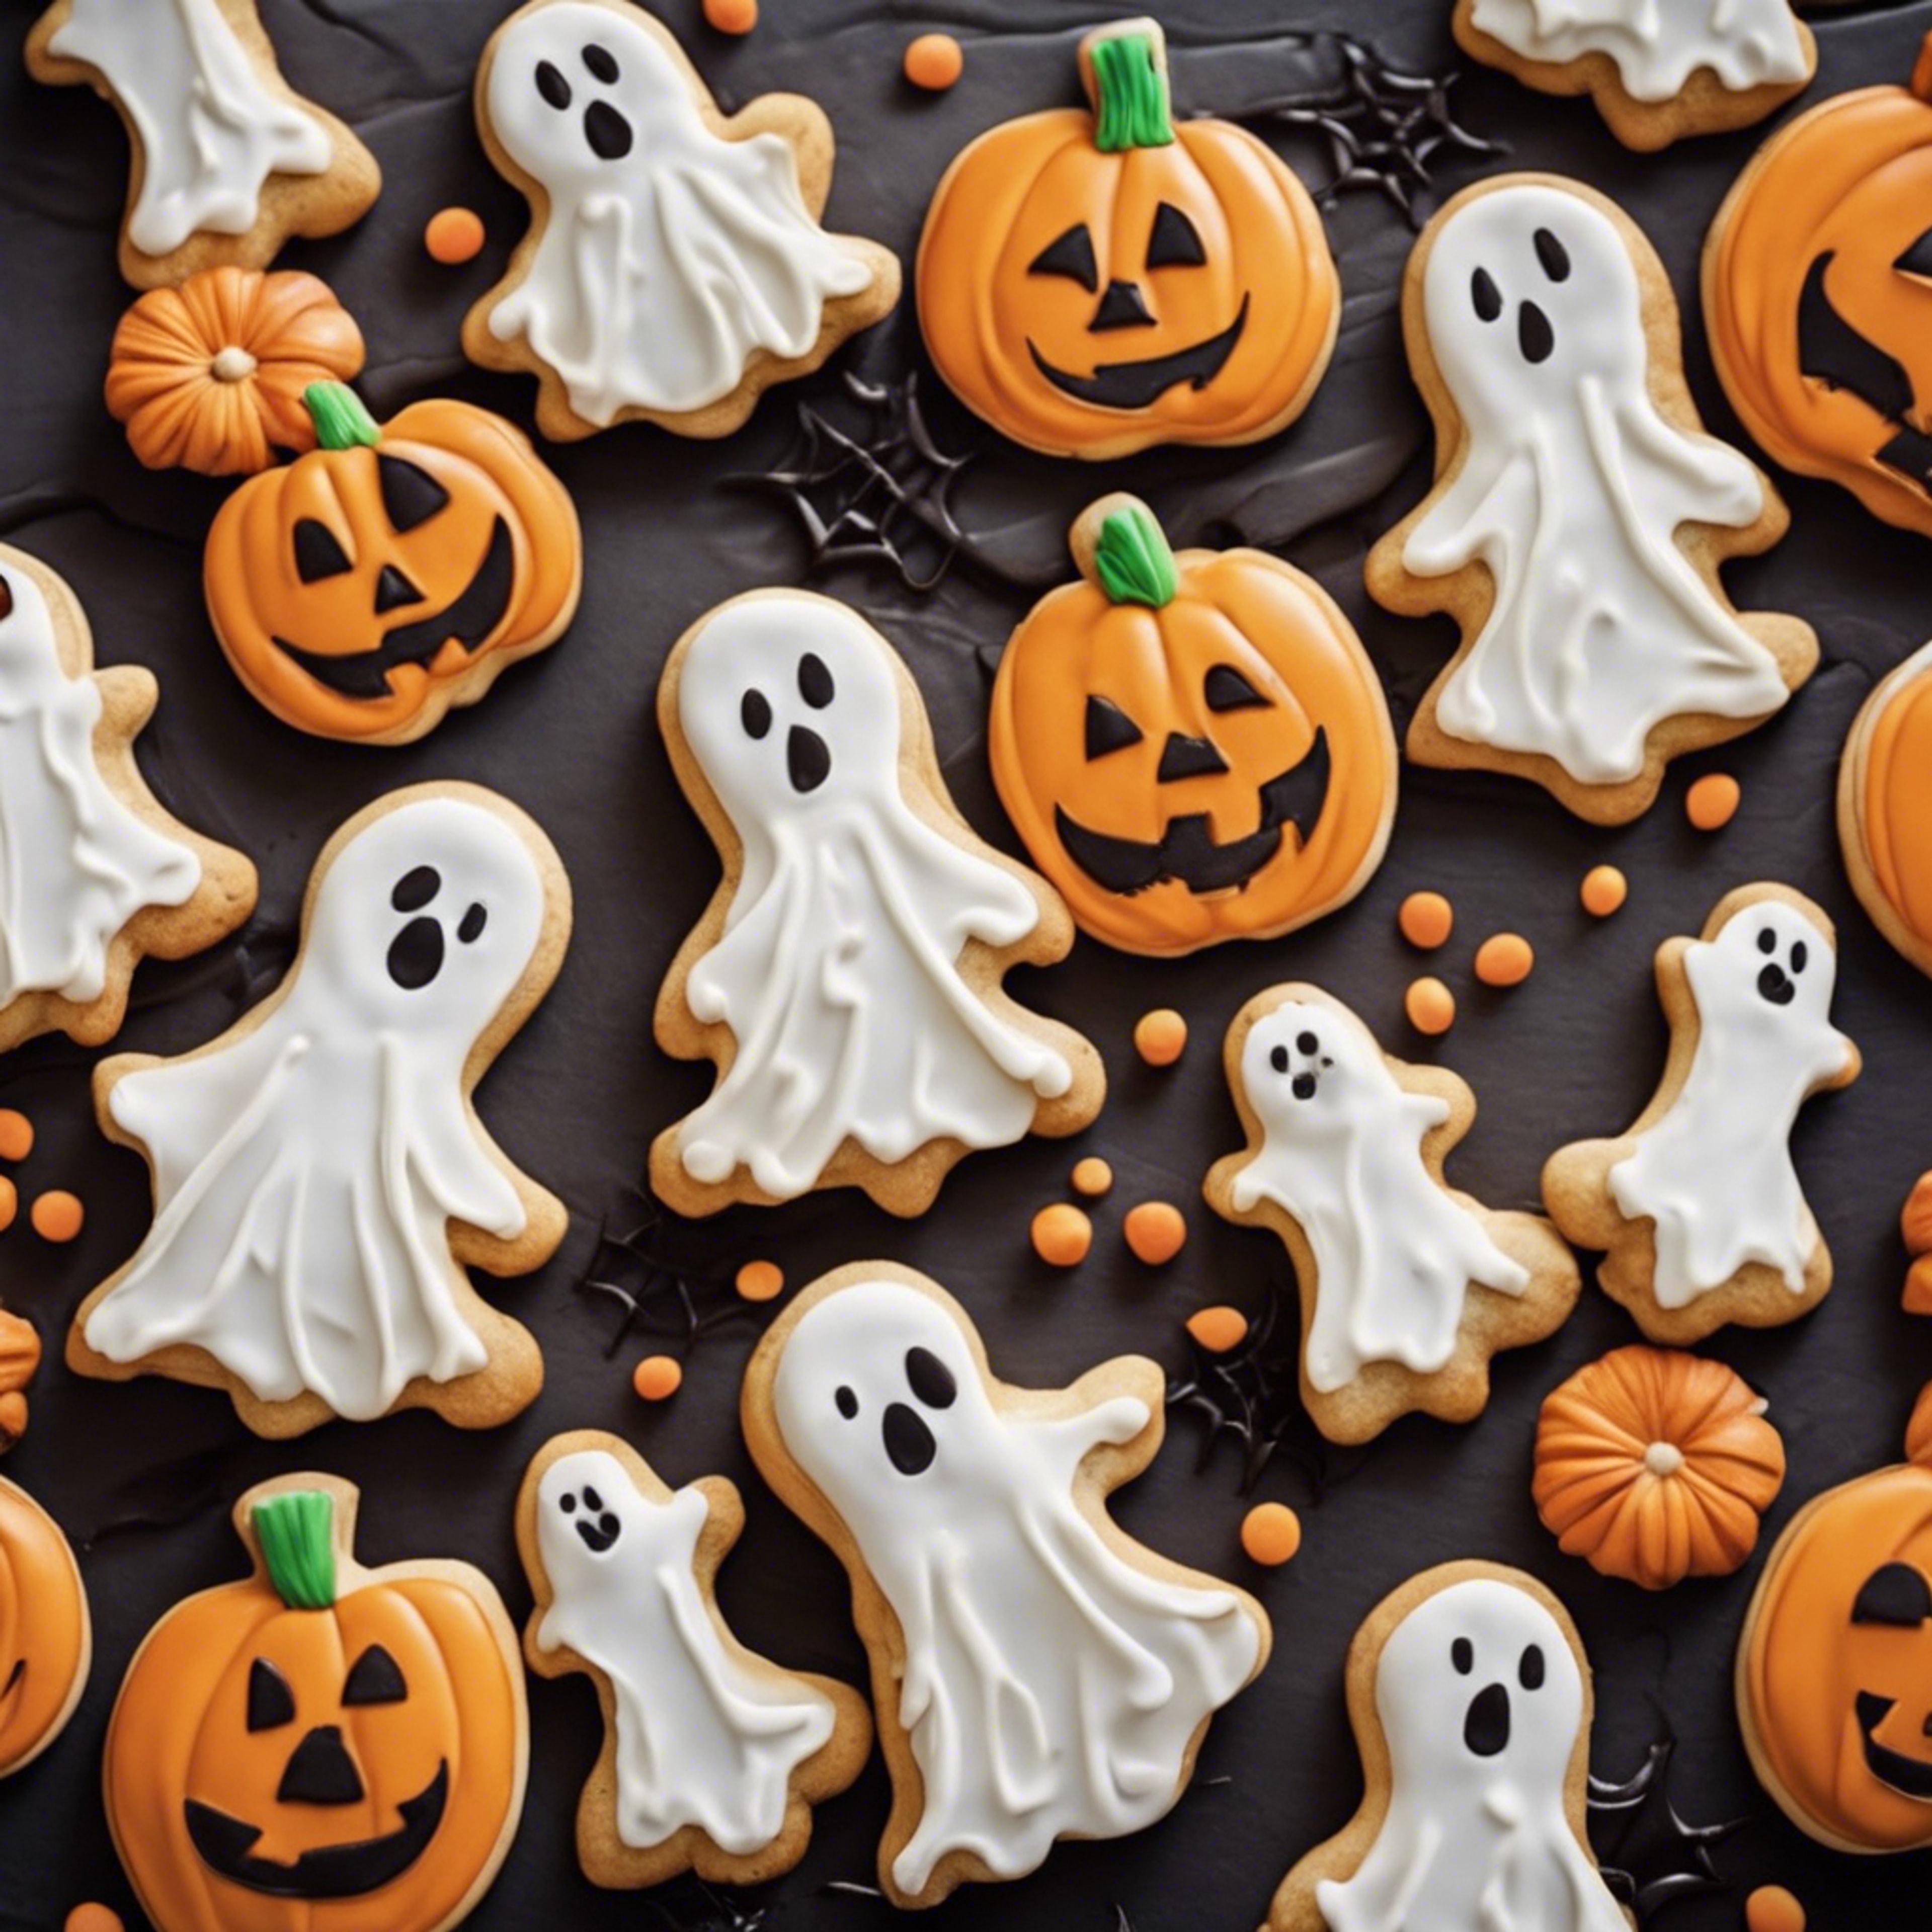 A bakery with a Halloween theme, featuring cookies shaped like ghosts and pumpkins. Hình nền[da61718461044d51ad06]